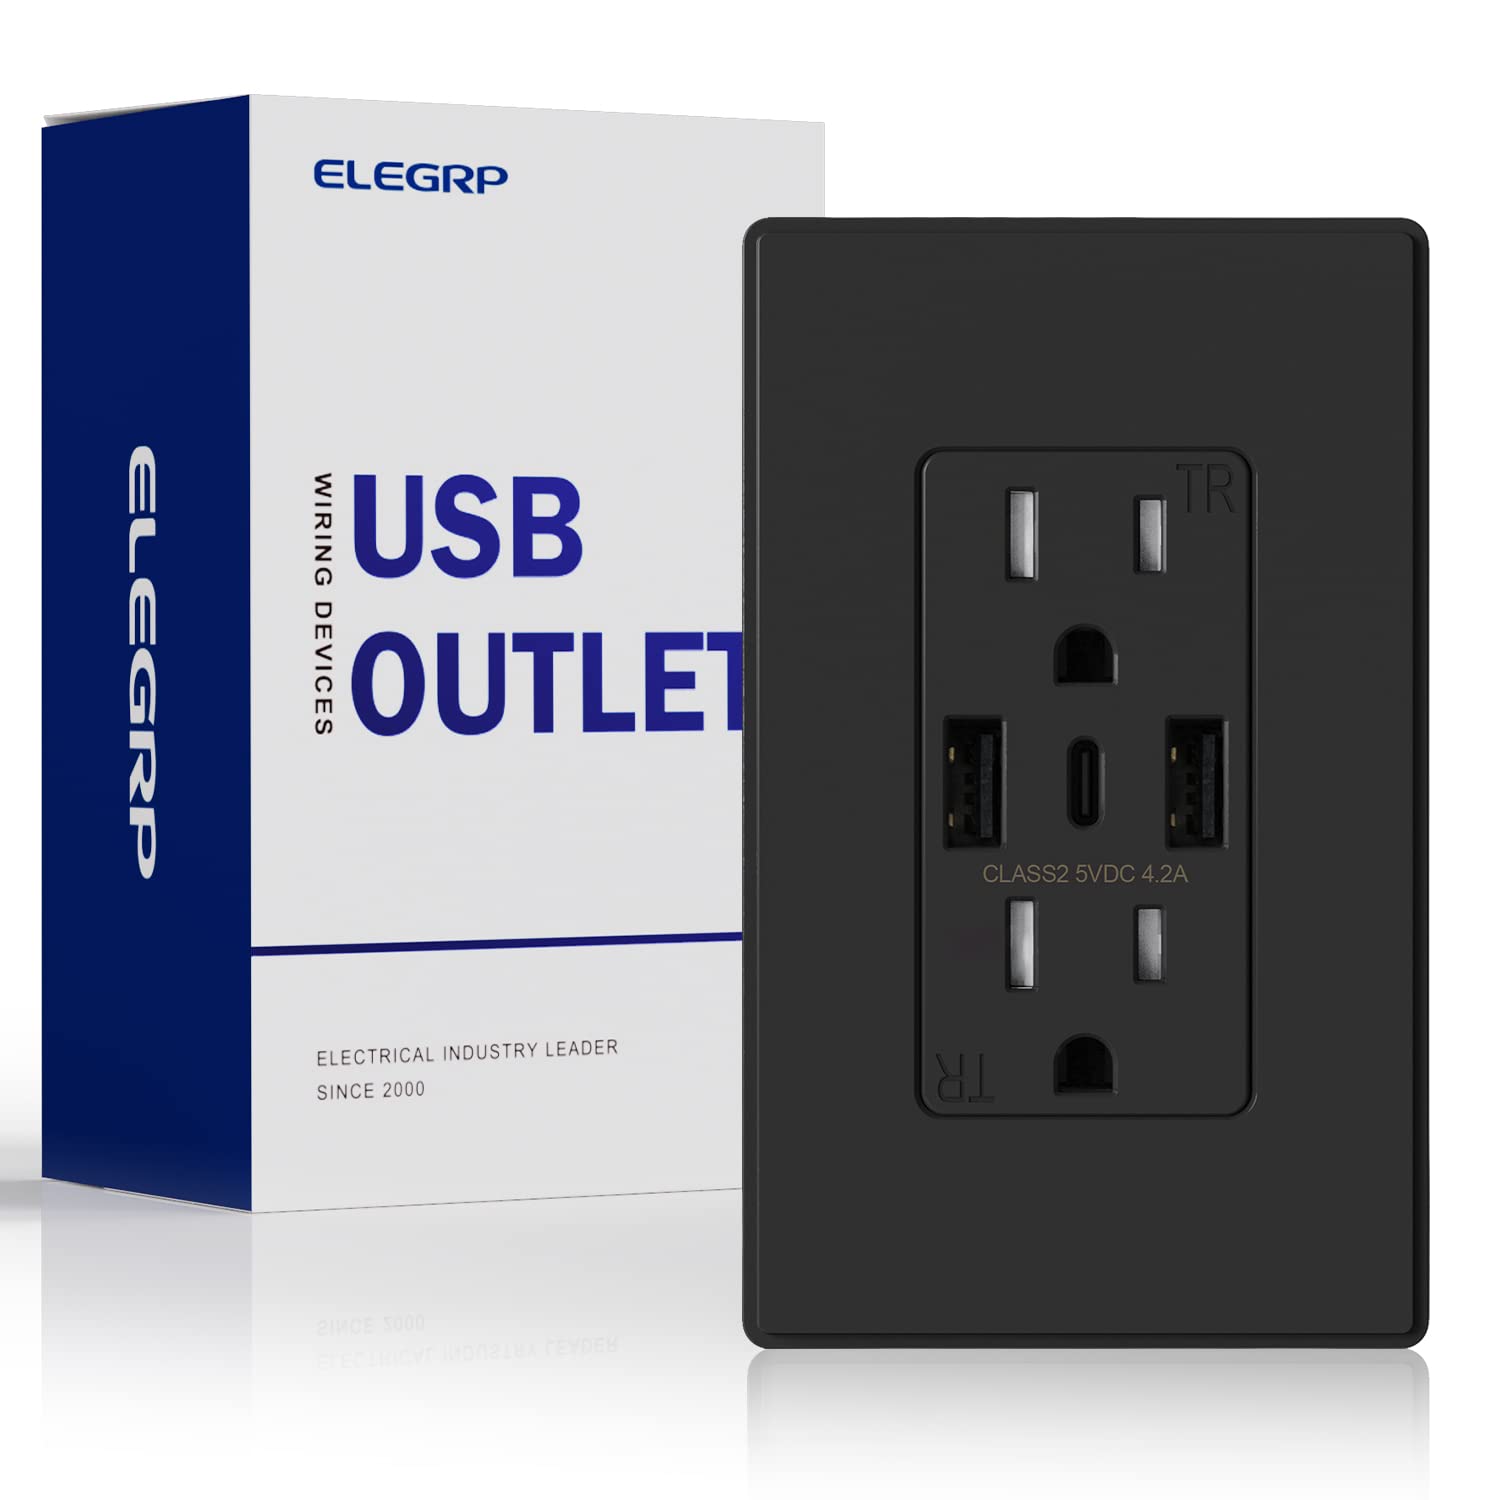 ELEGRP USB 4.2AAC Wall Outlet